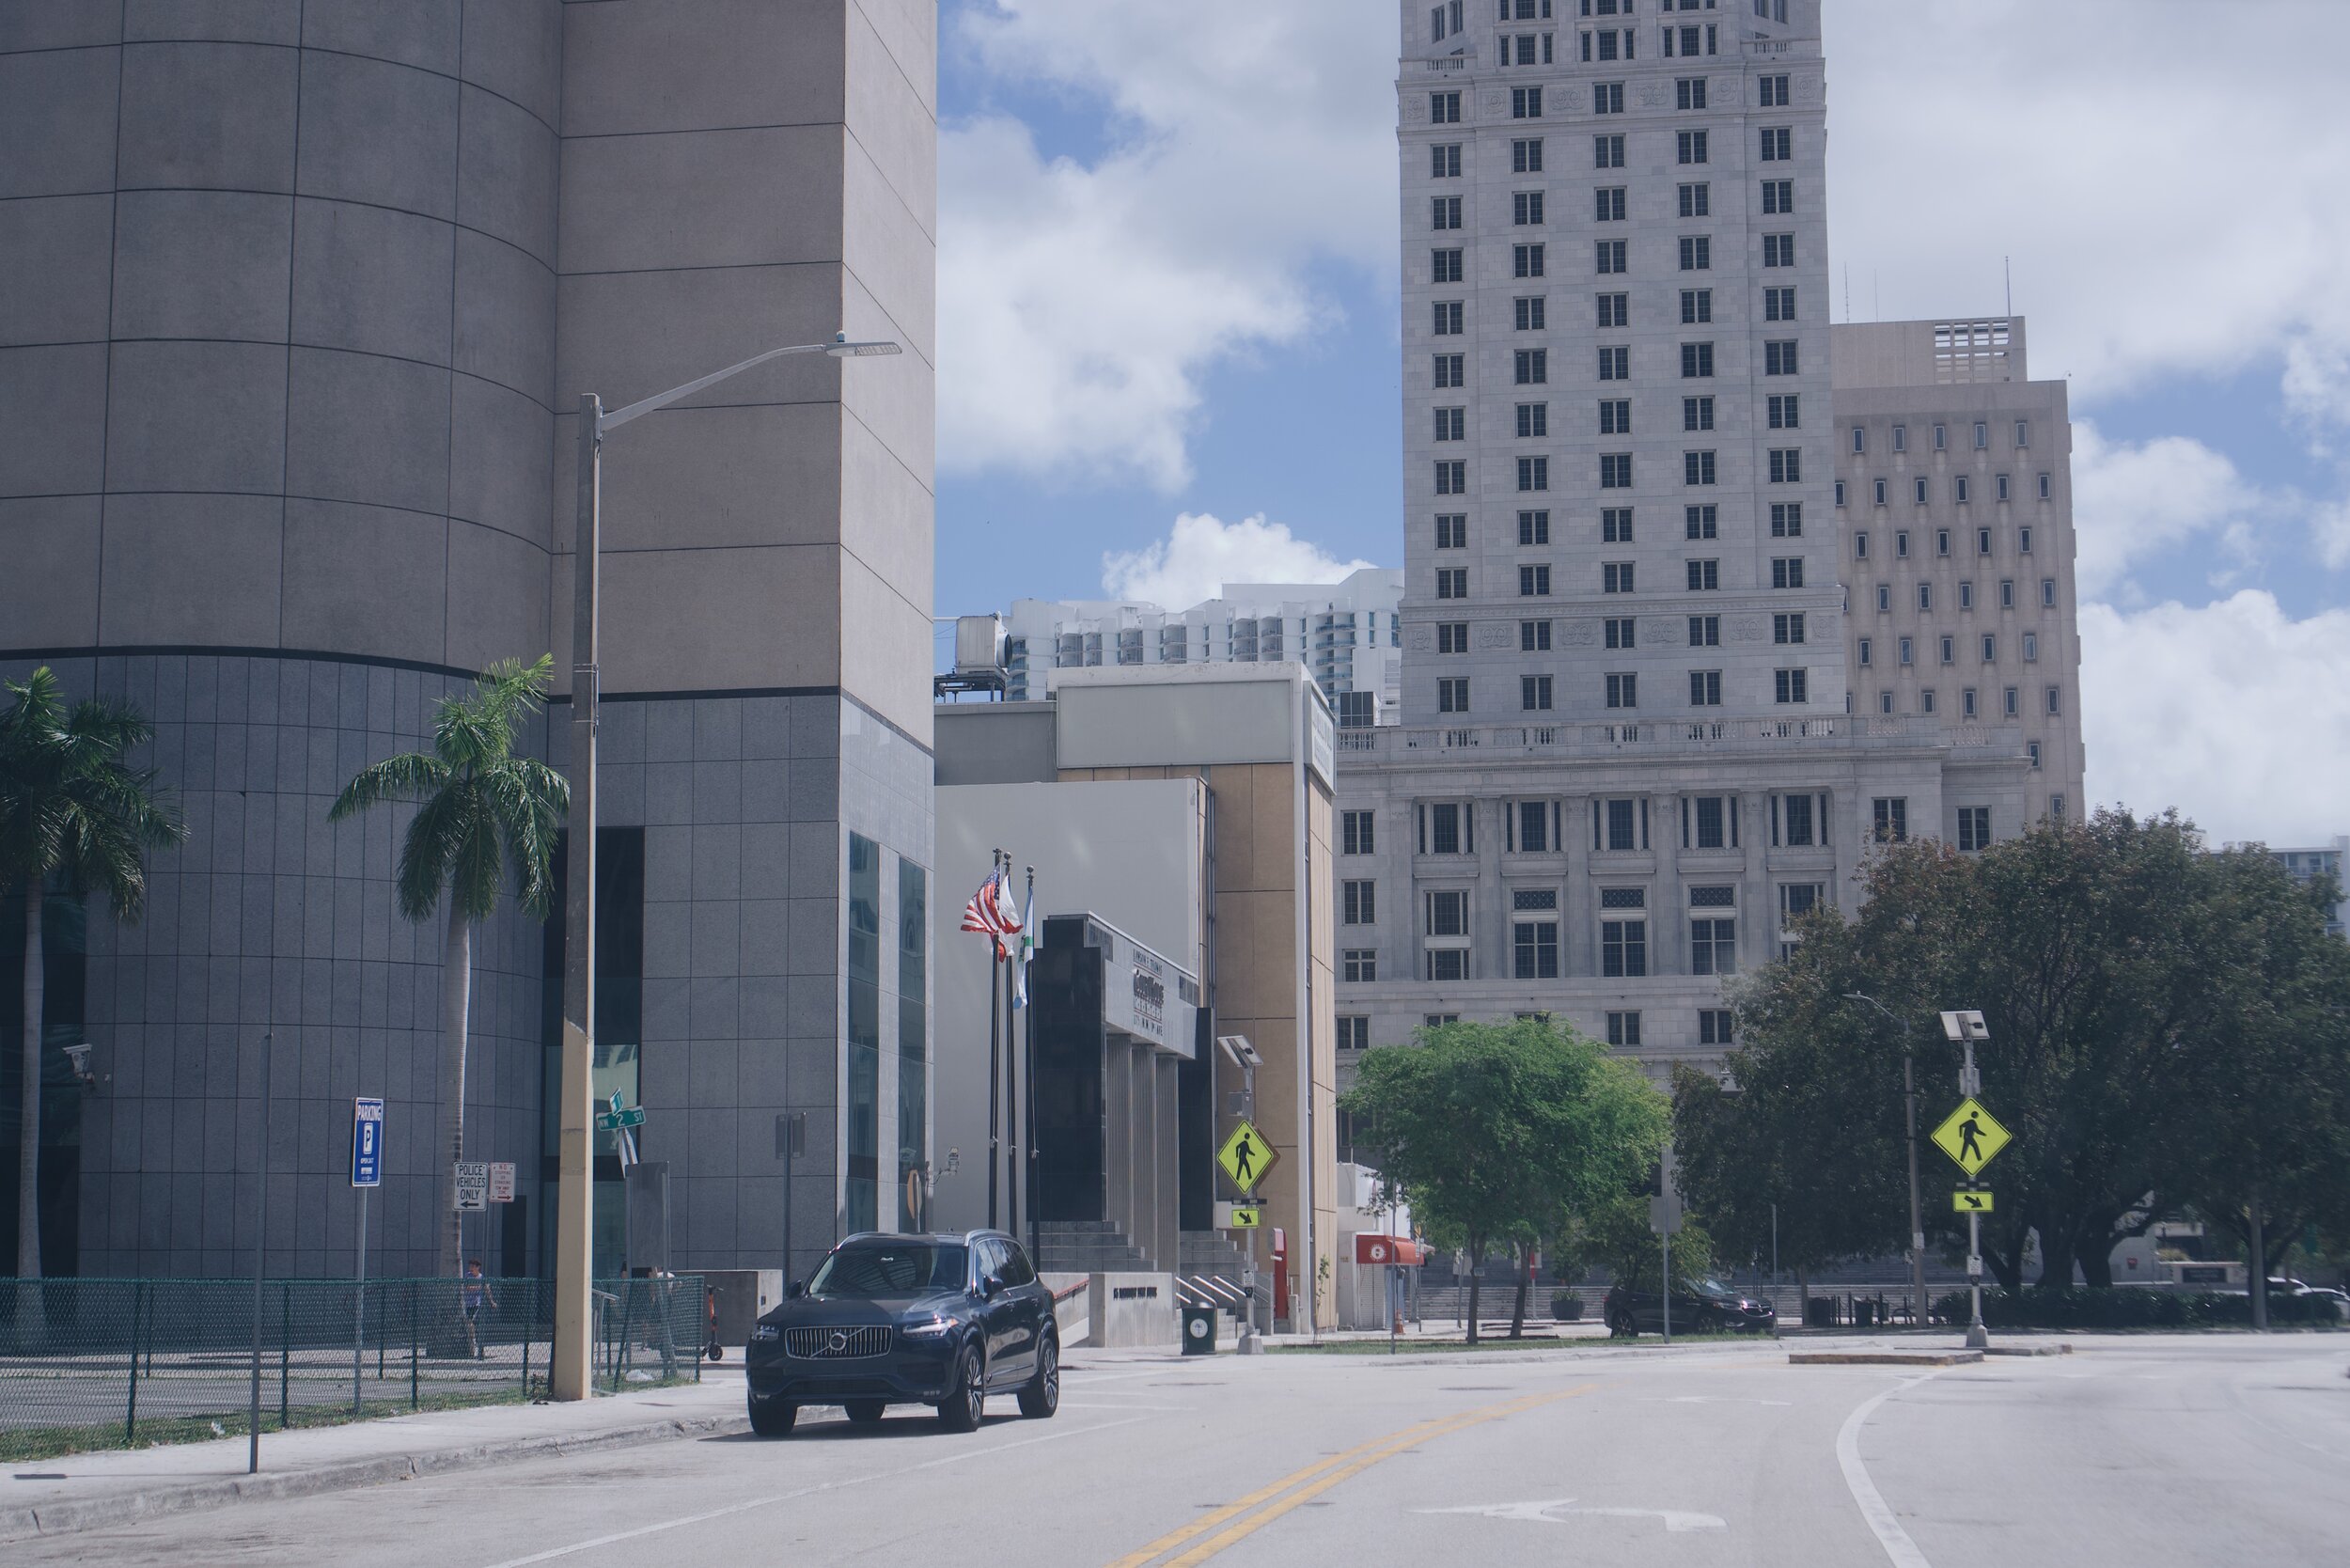 Court of Downtown Miami. March 22, 2020